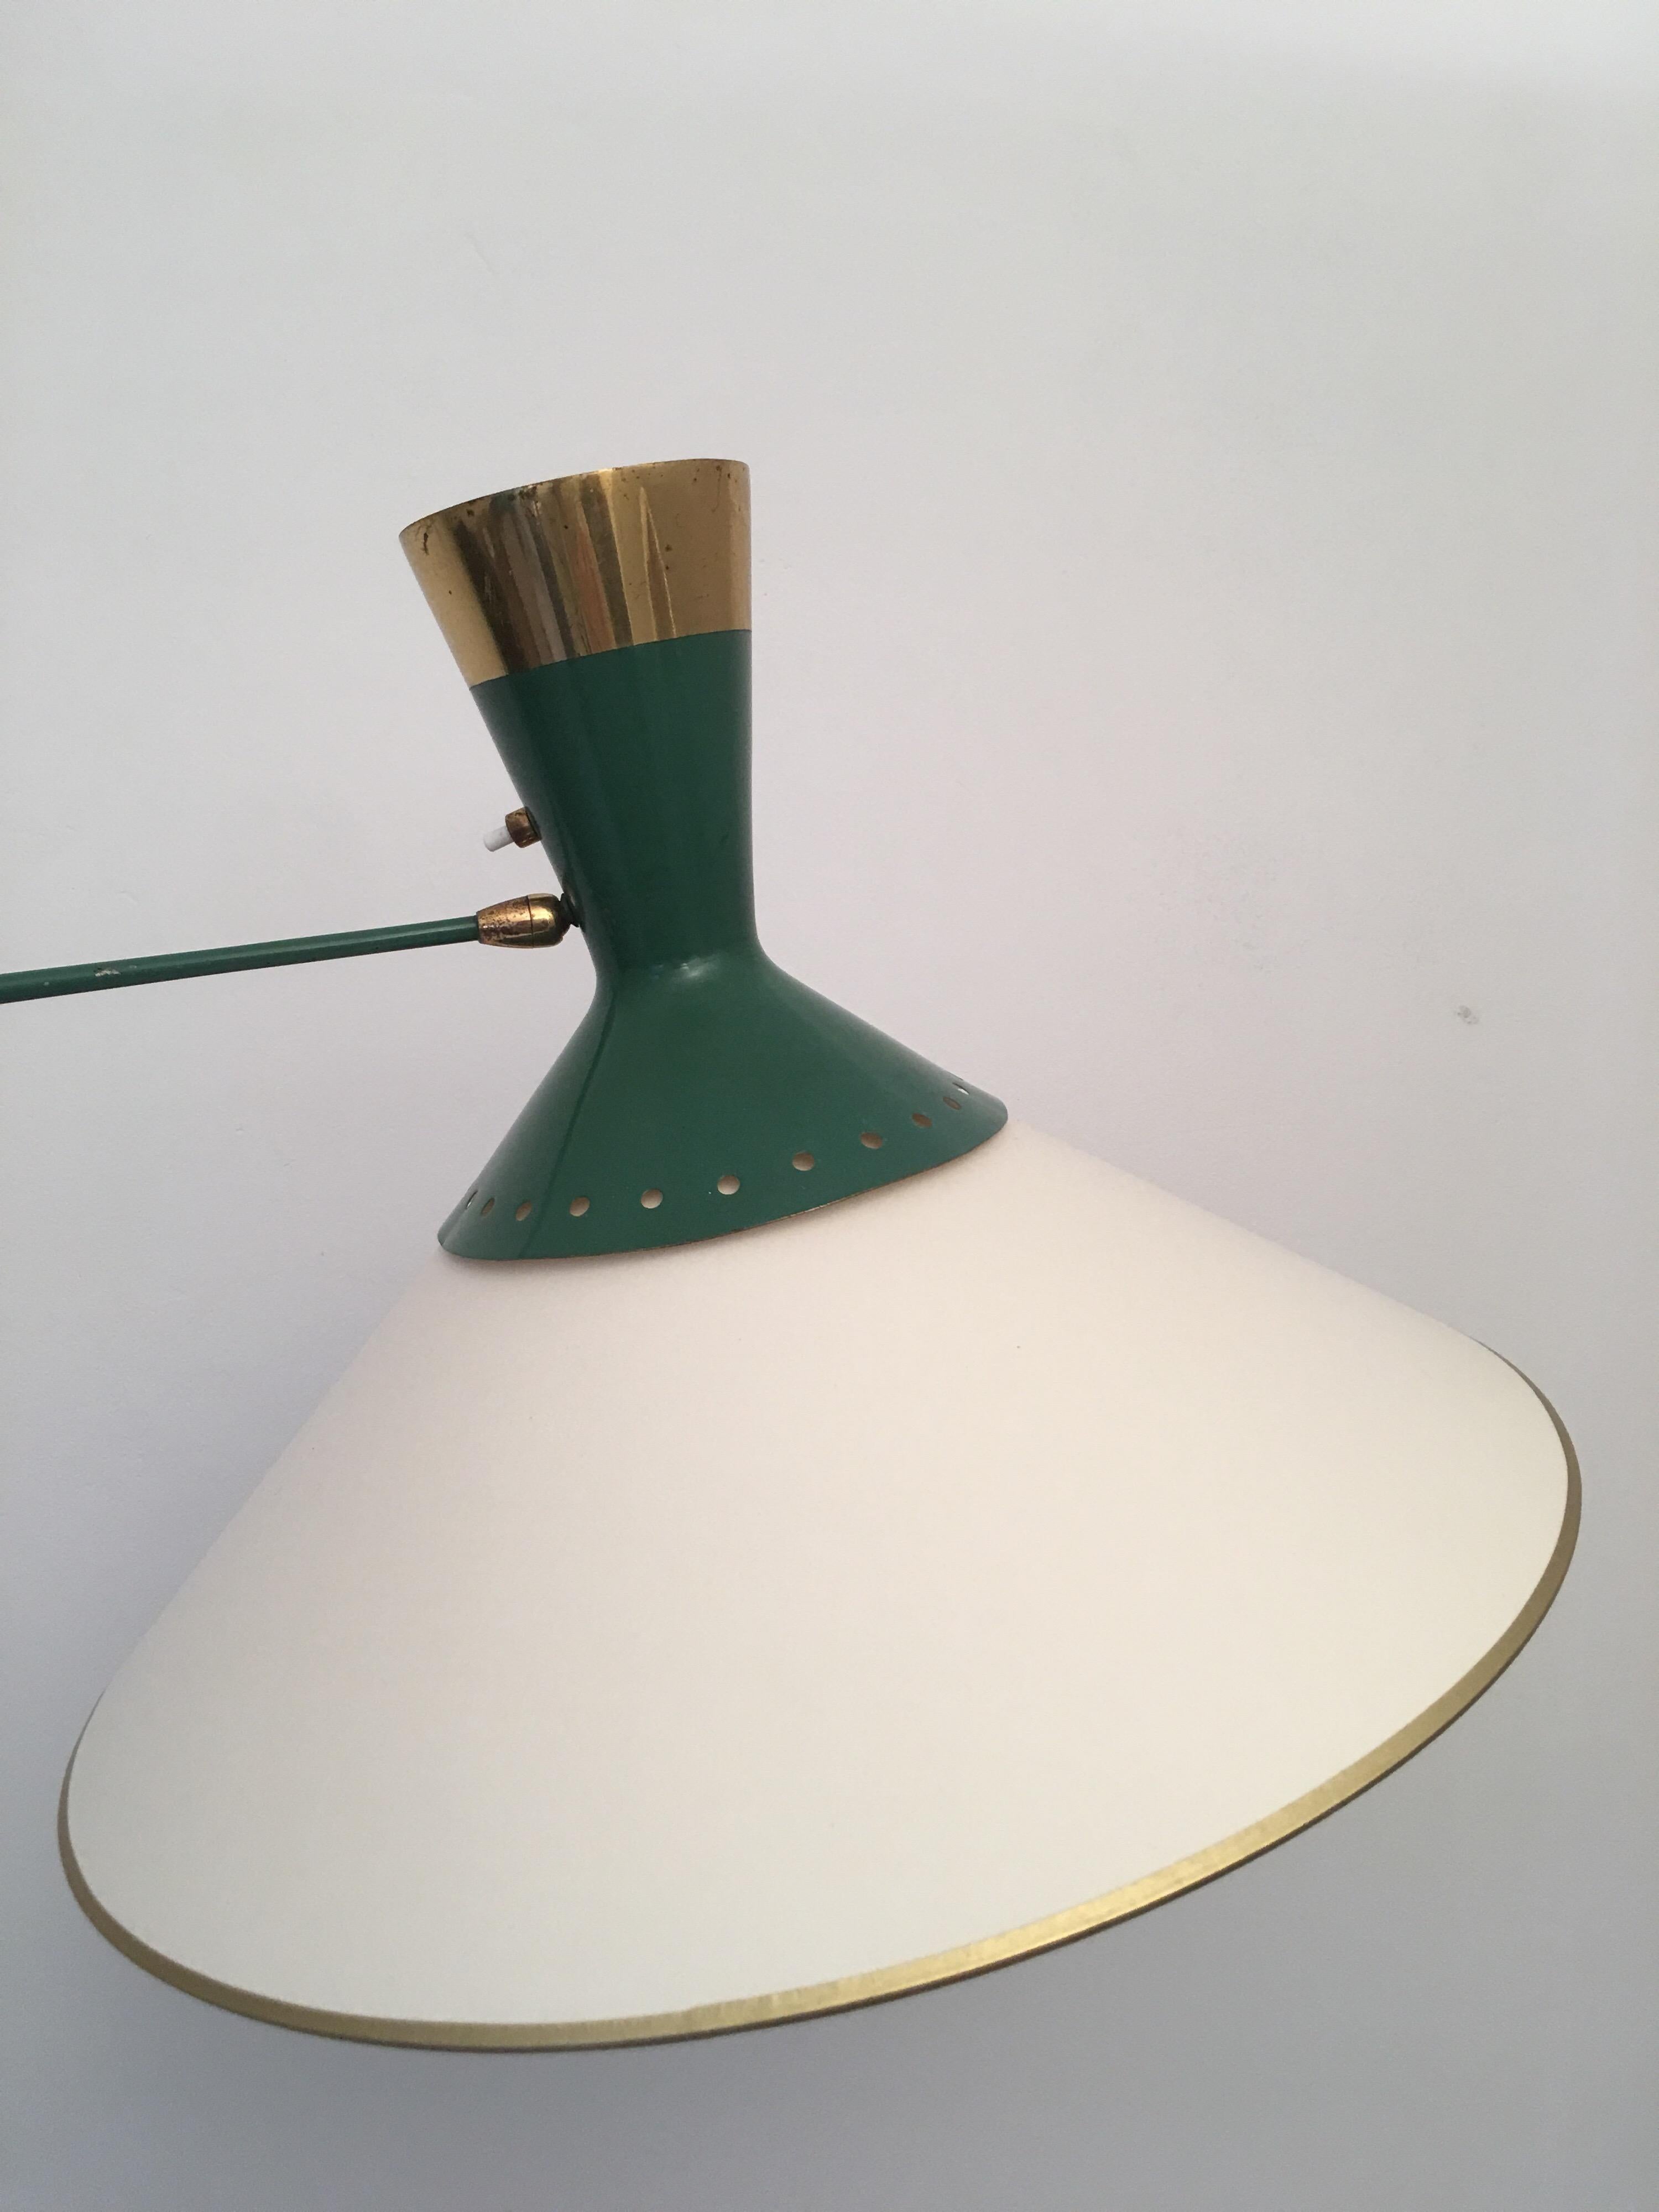 Arlus Green and Gilt Counter Balance Swing Arm Wall Lamp, French 1950s For Sale 3